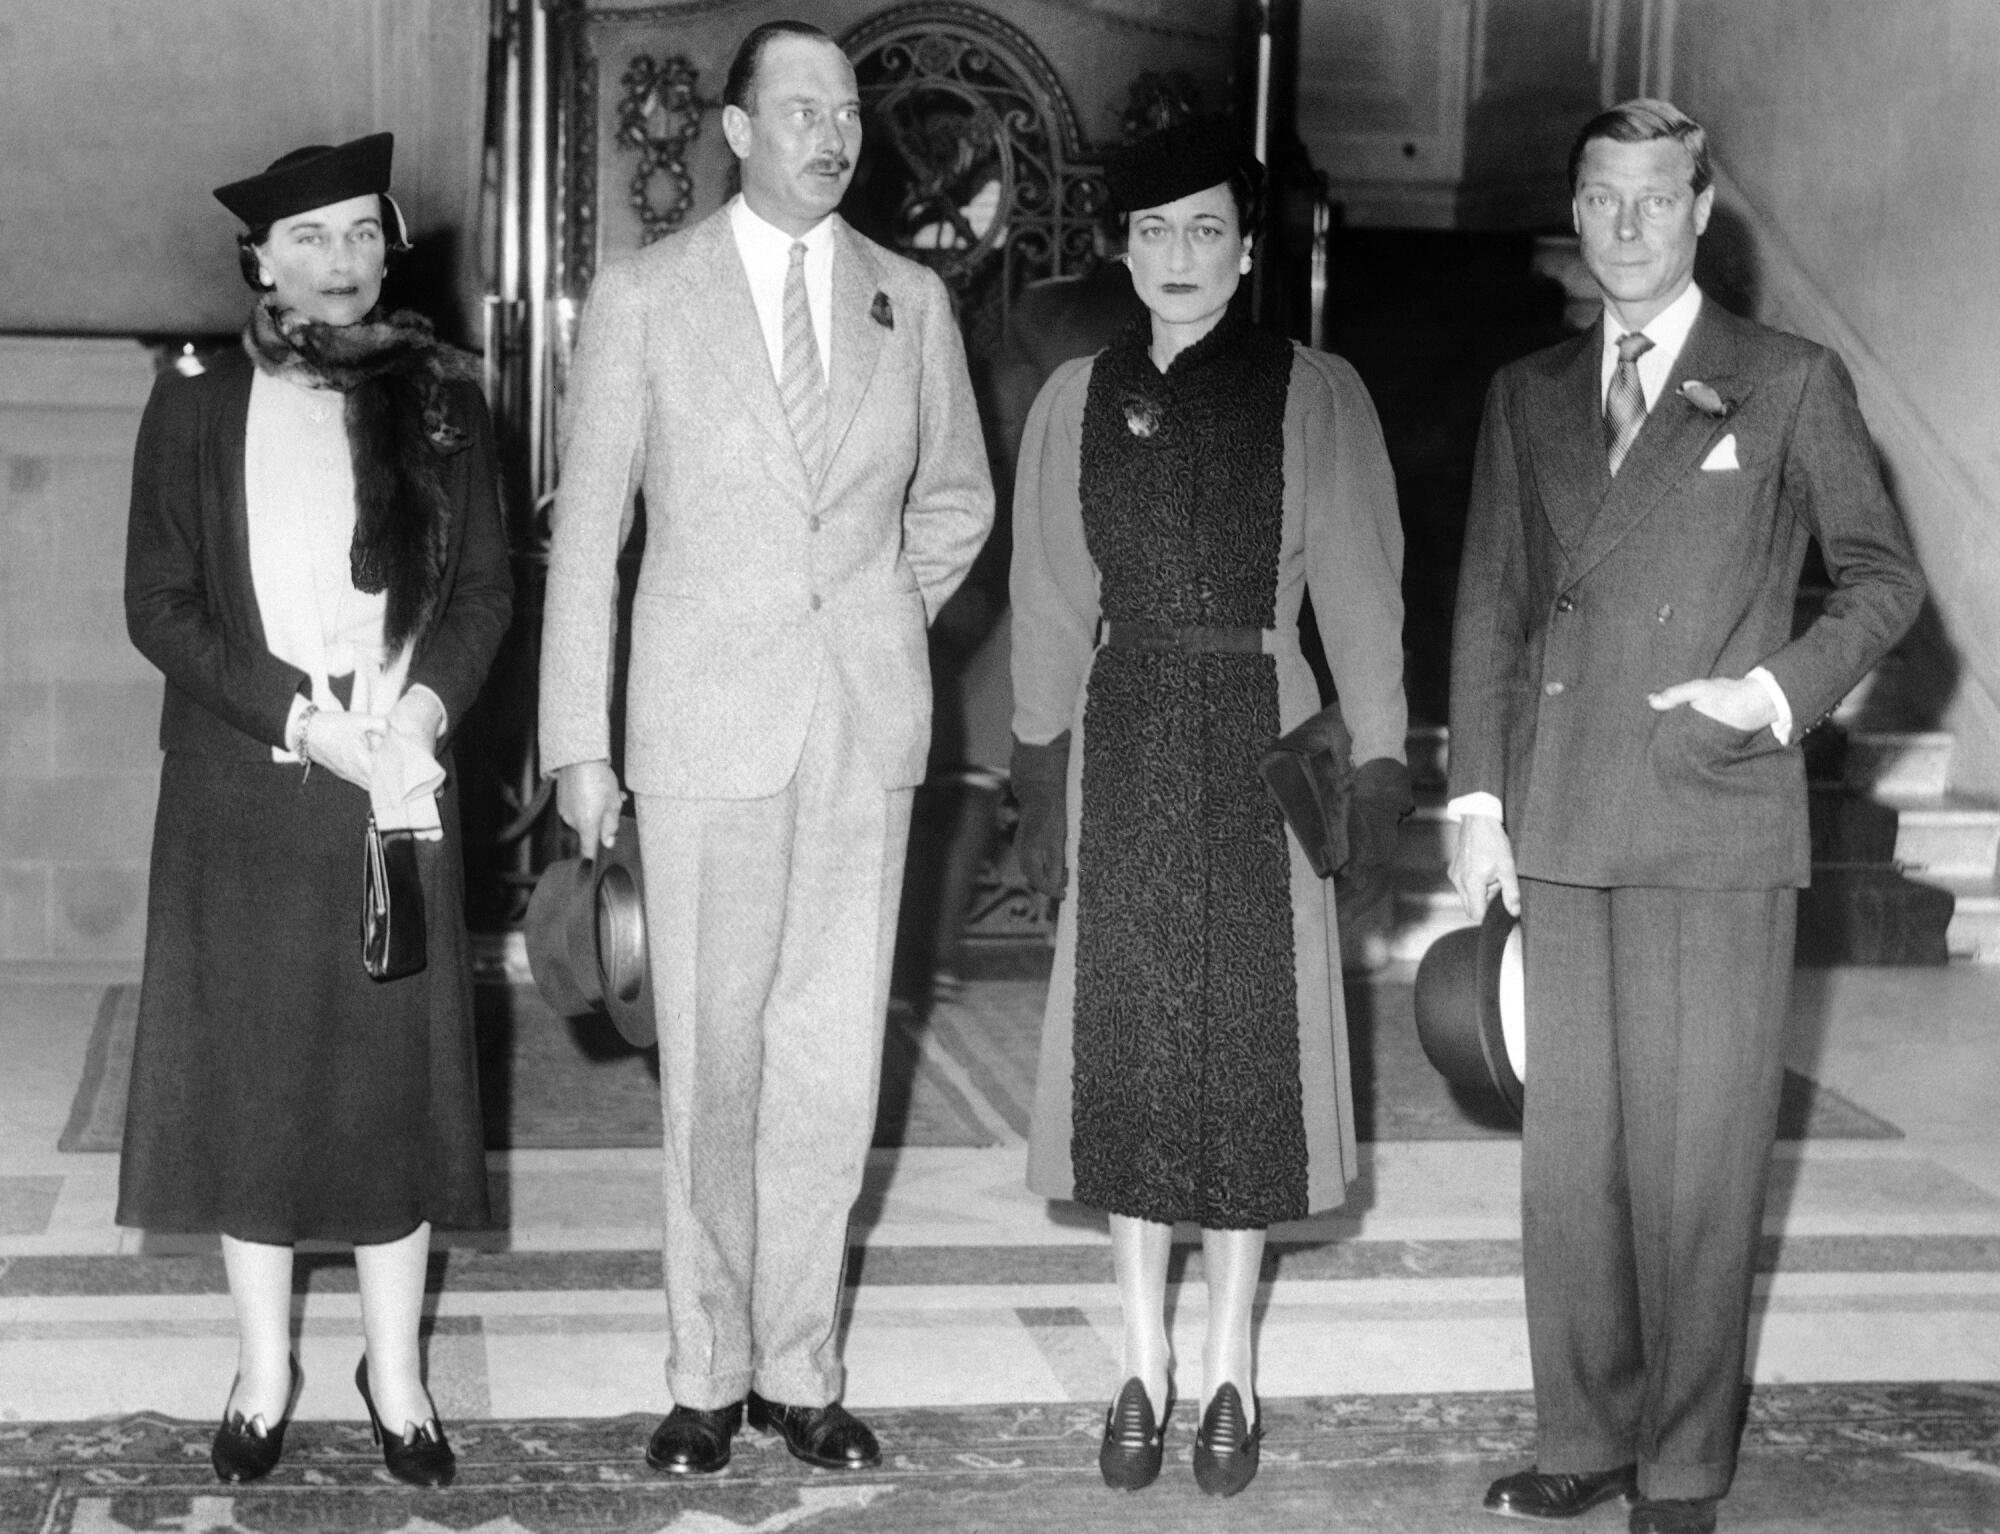 A historic photo shows the Duke and Duchess of Gloucester and Duke and Duchess of Windsor.